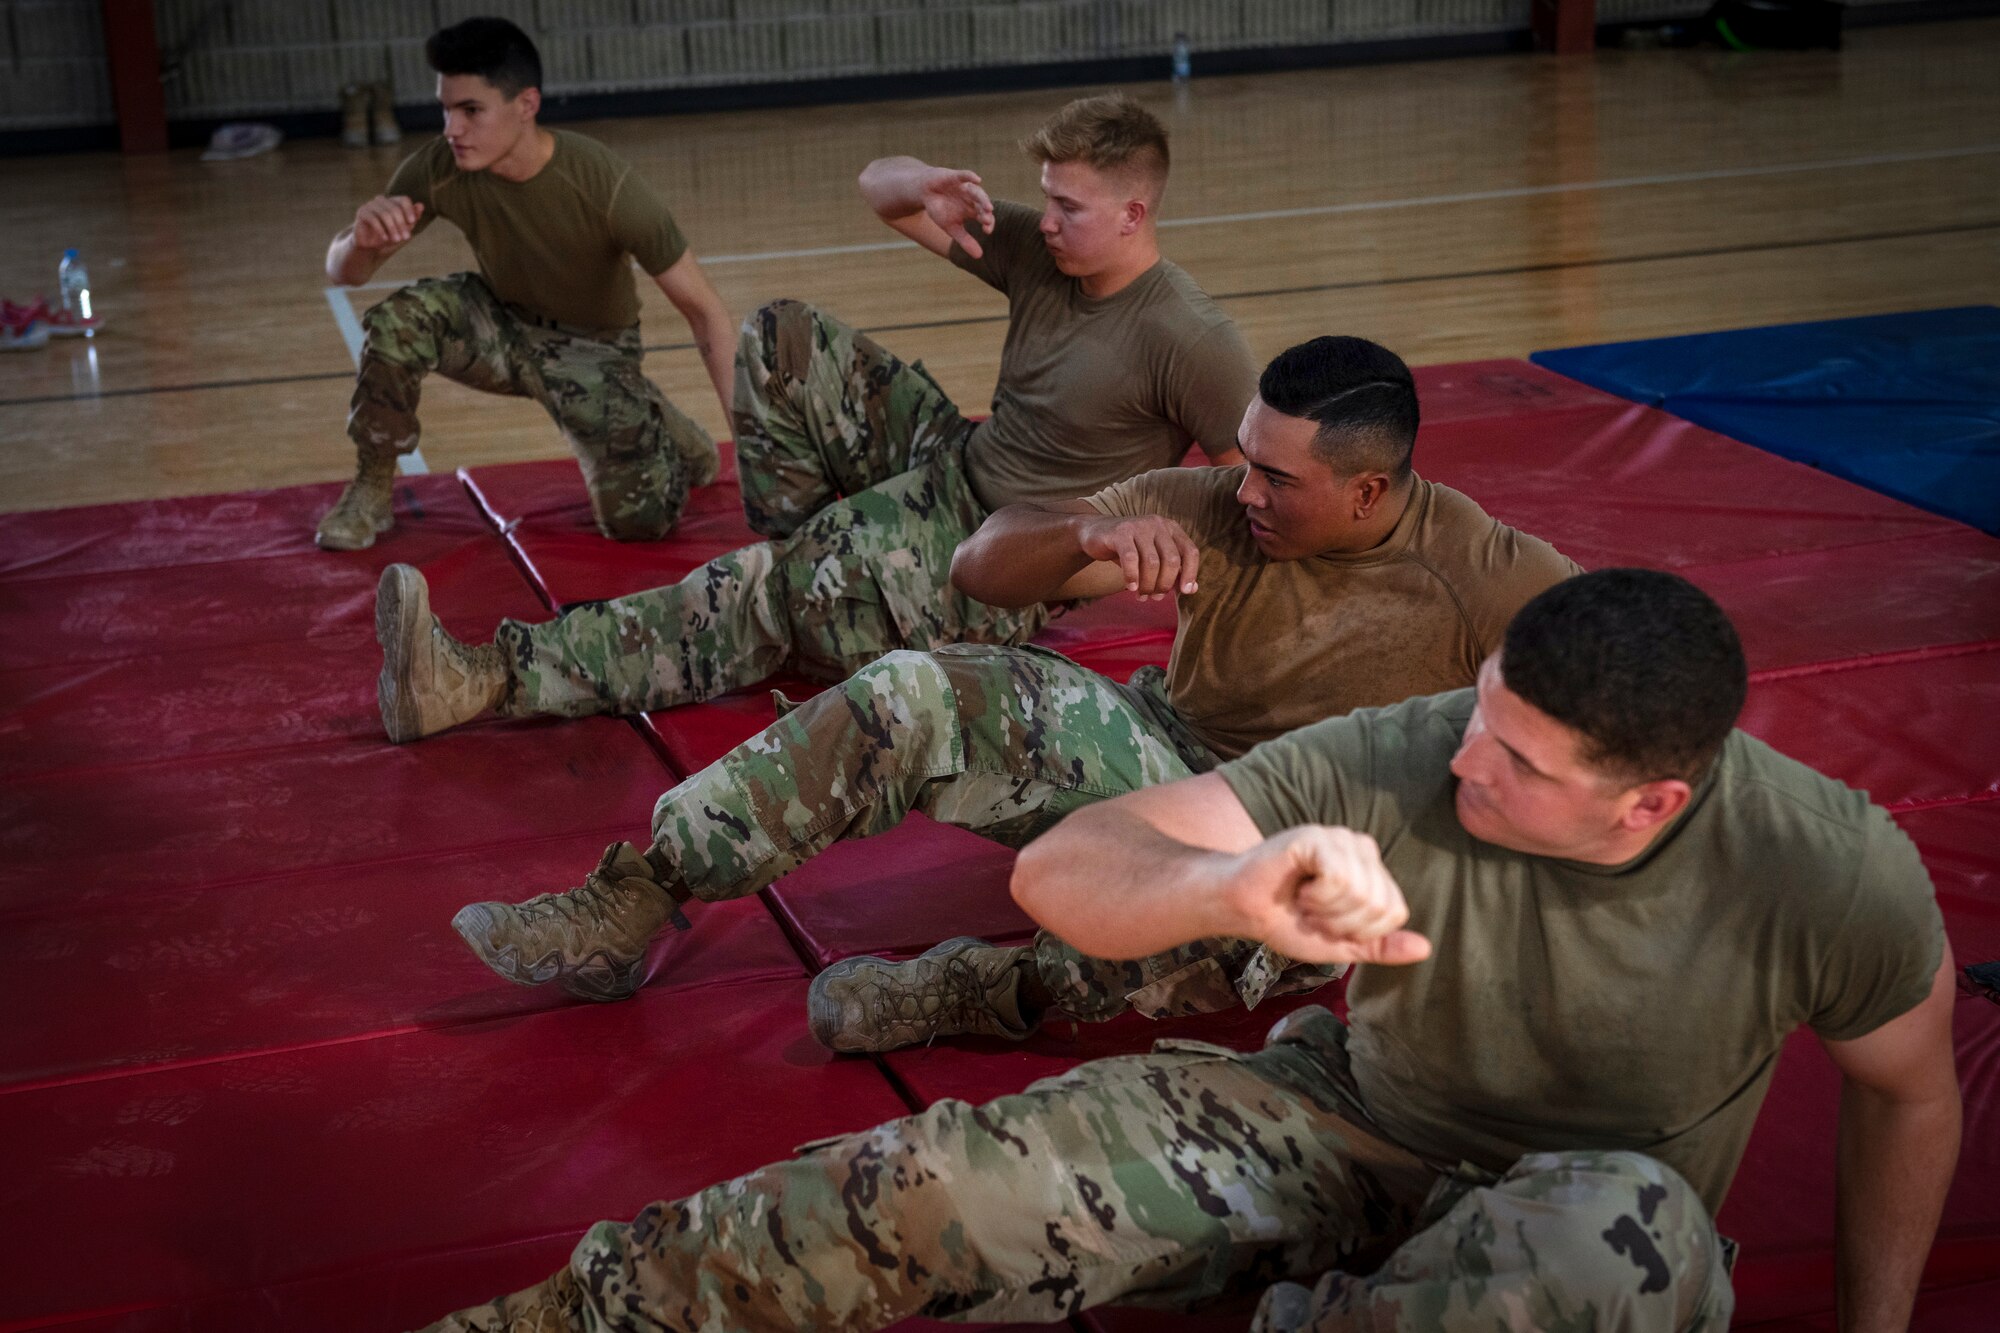 Airmen practice martial arts moves during training.